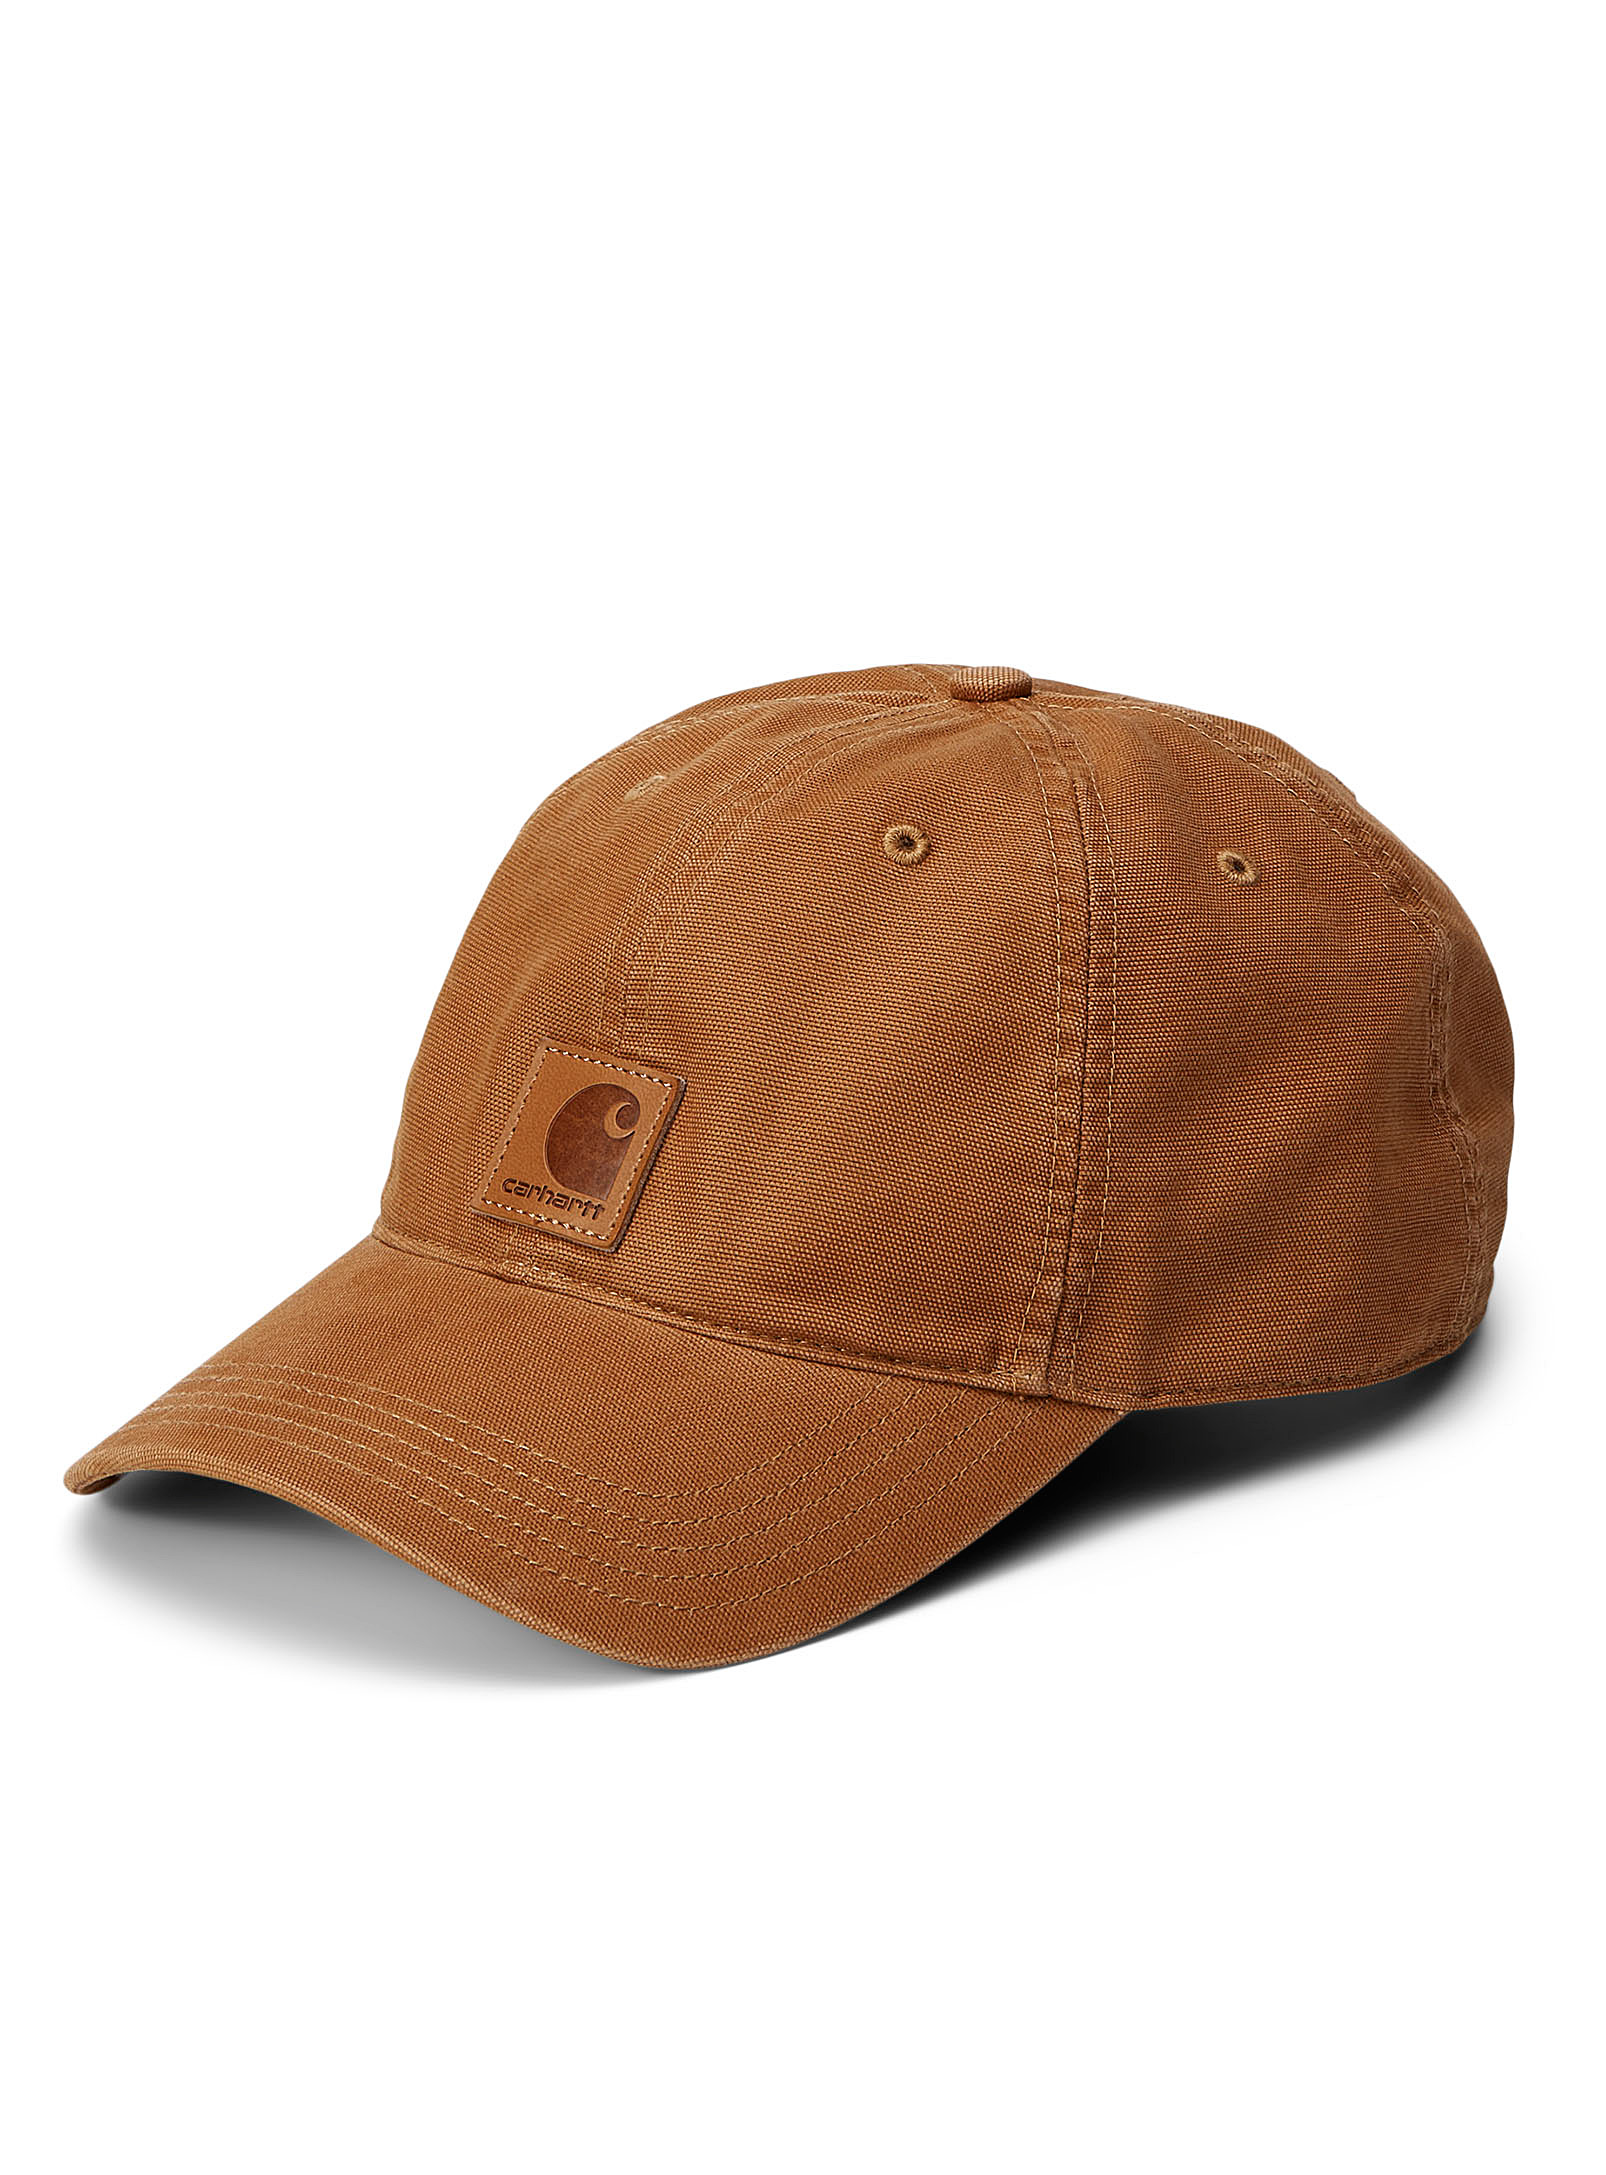 Carhartt Washed Cotton Baseball Cap In Brown